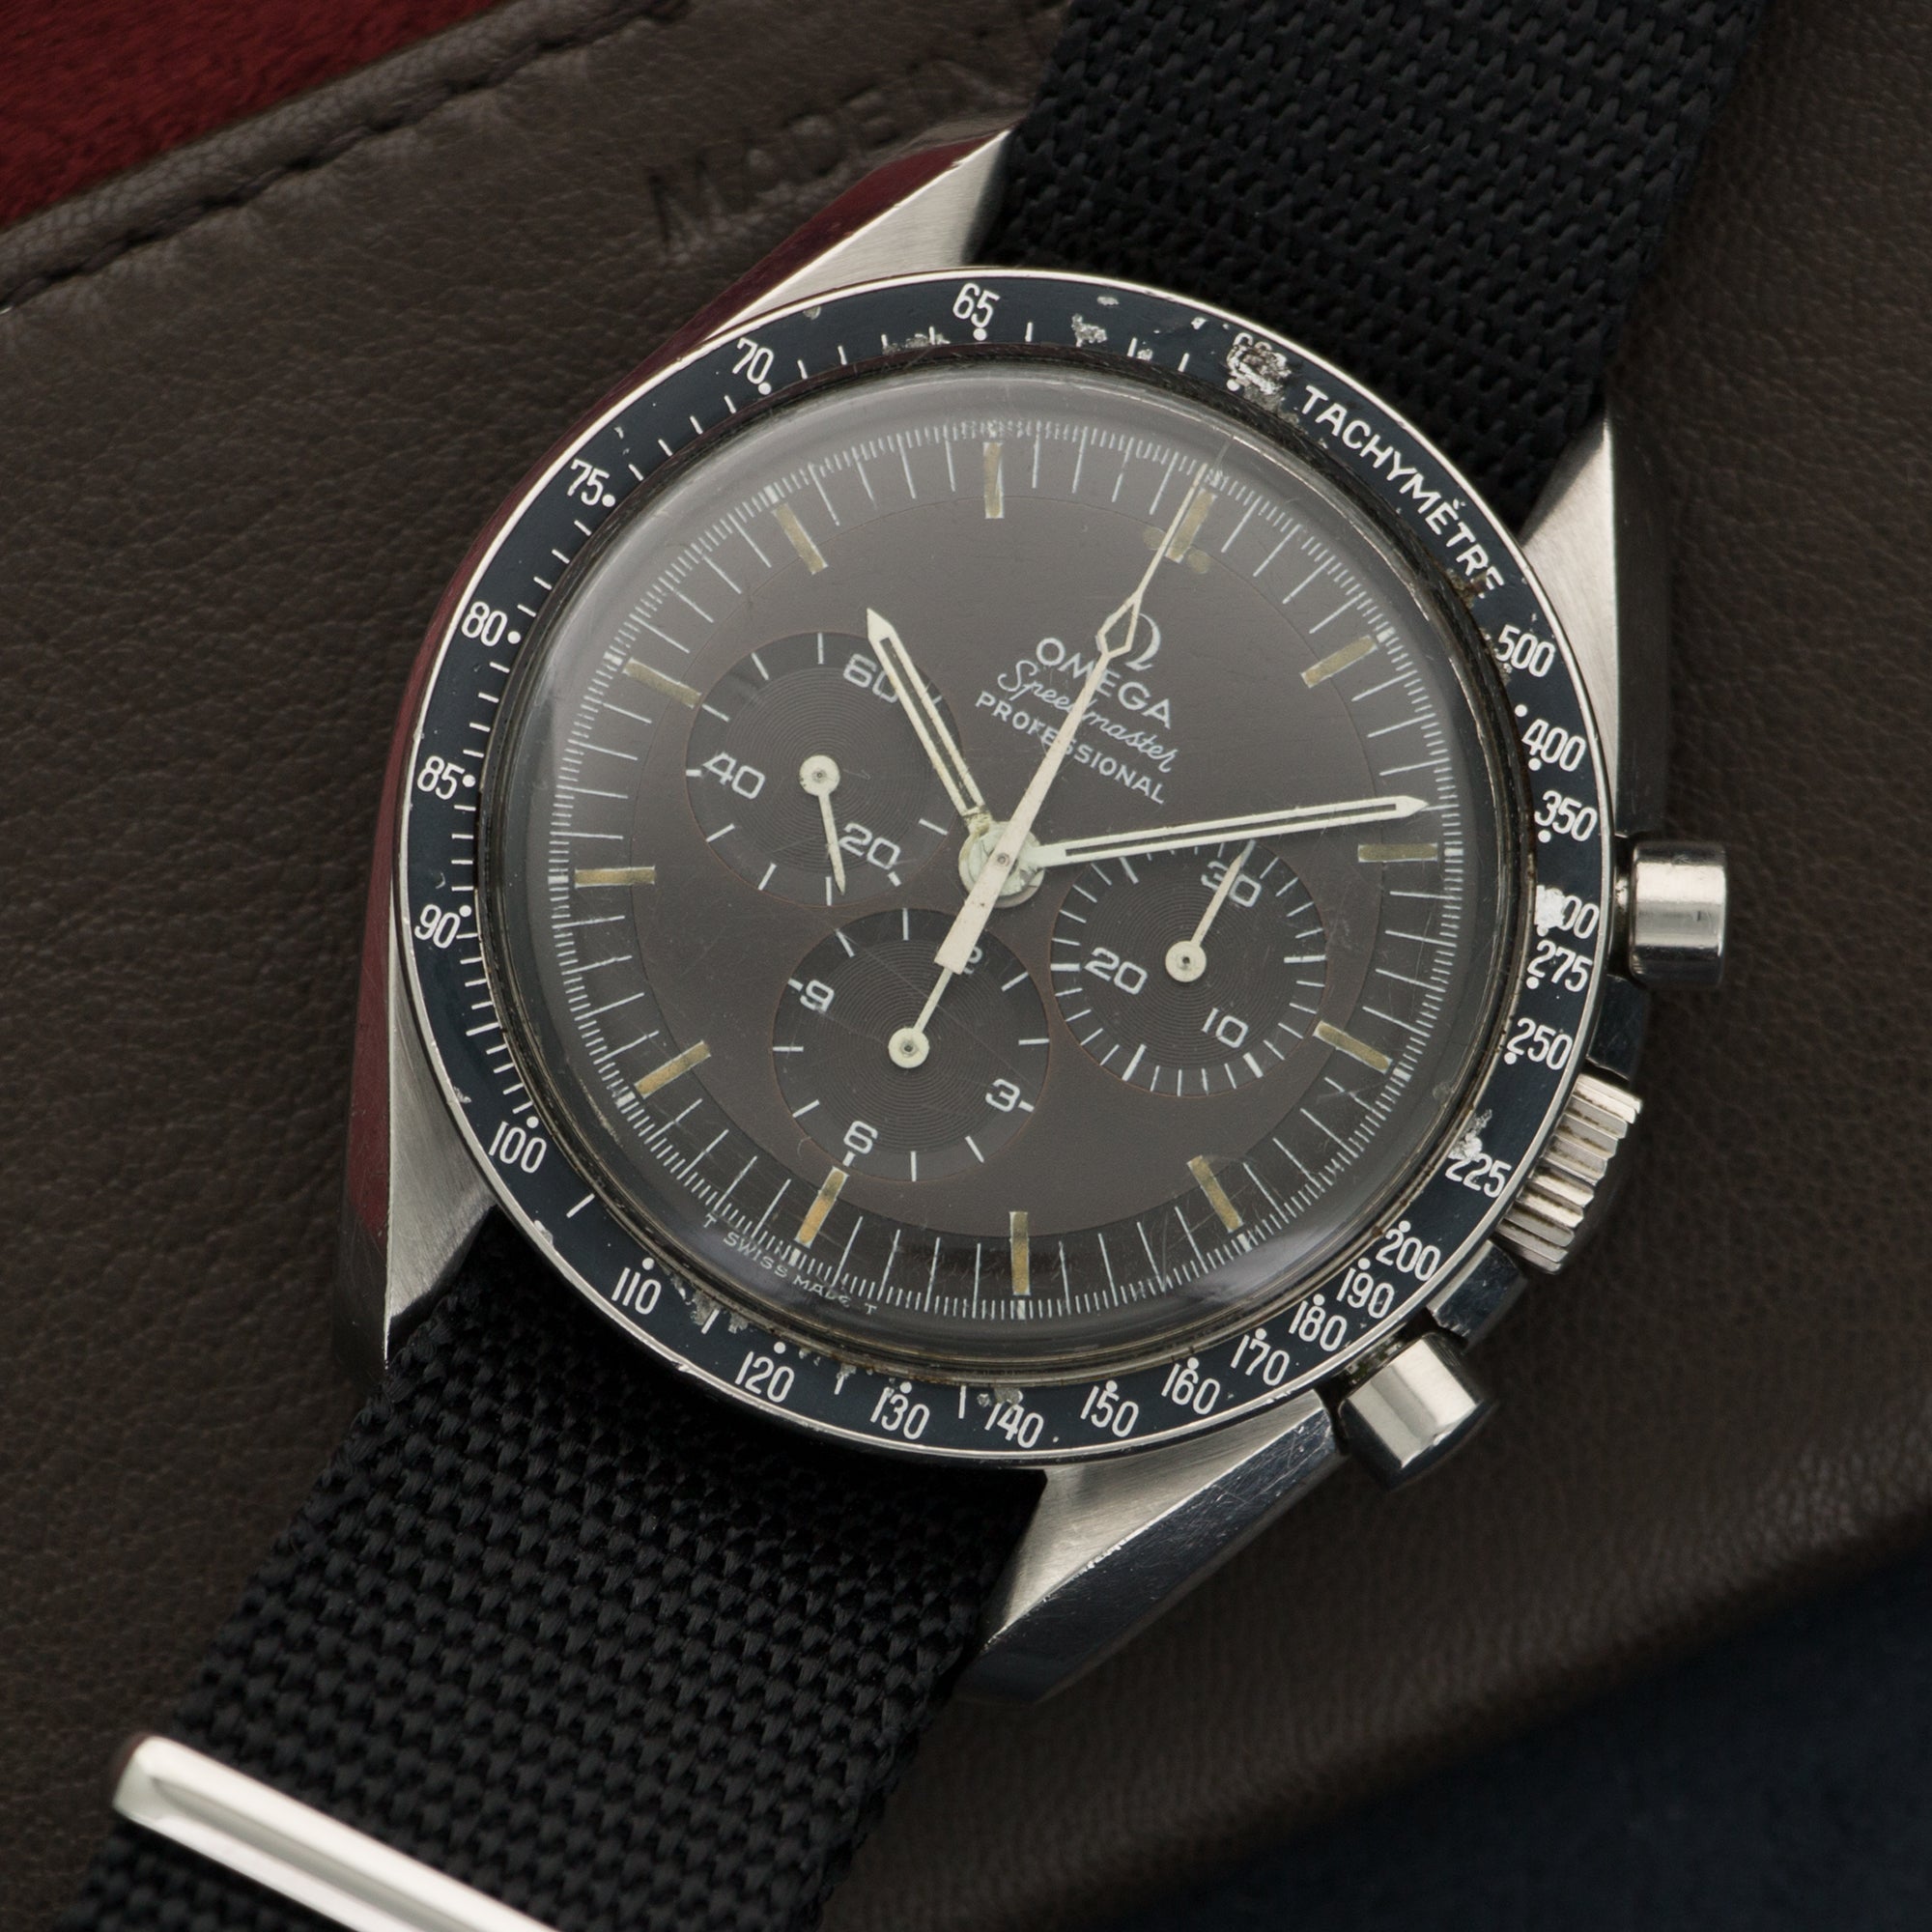 Omega - Omega Stainless Steel Speedmaster Watch Ref. 145.022 - The Keystone Watches